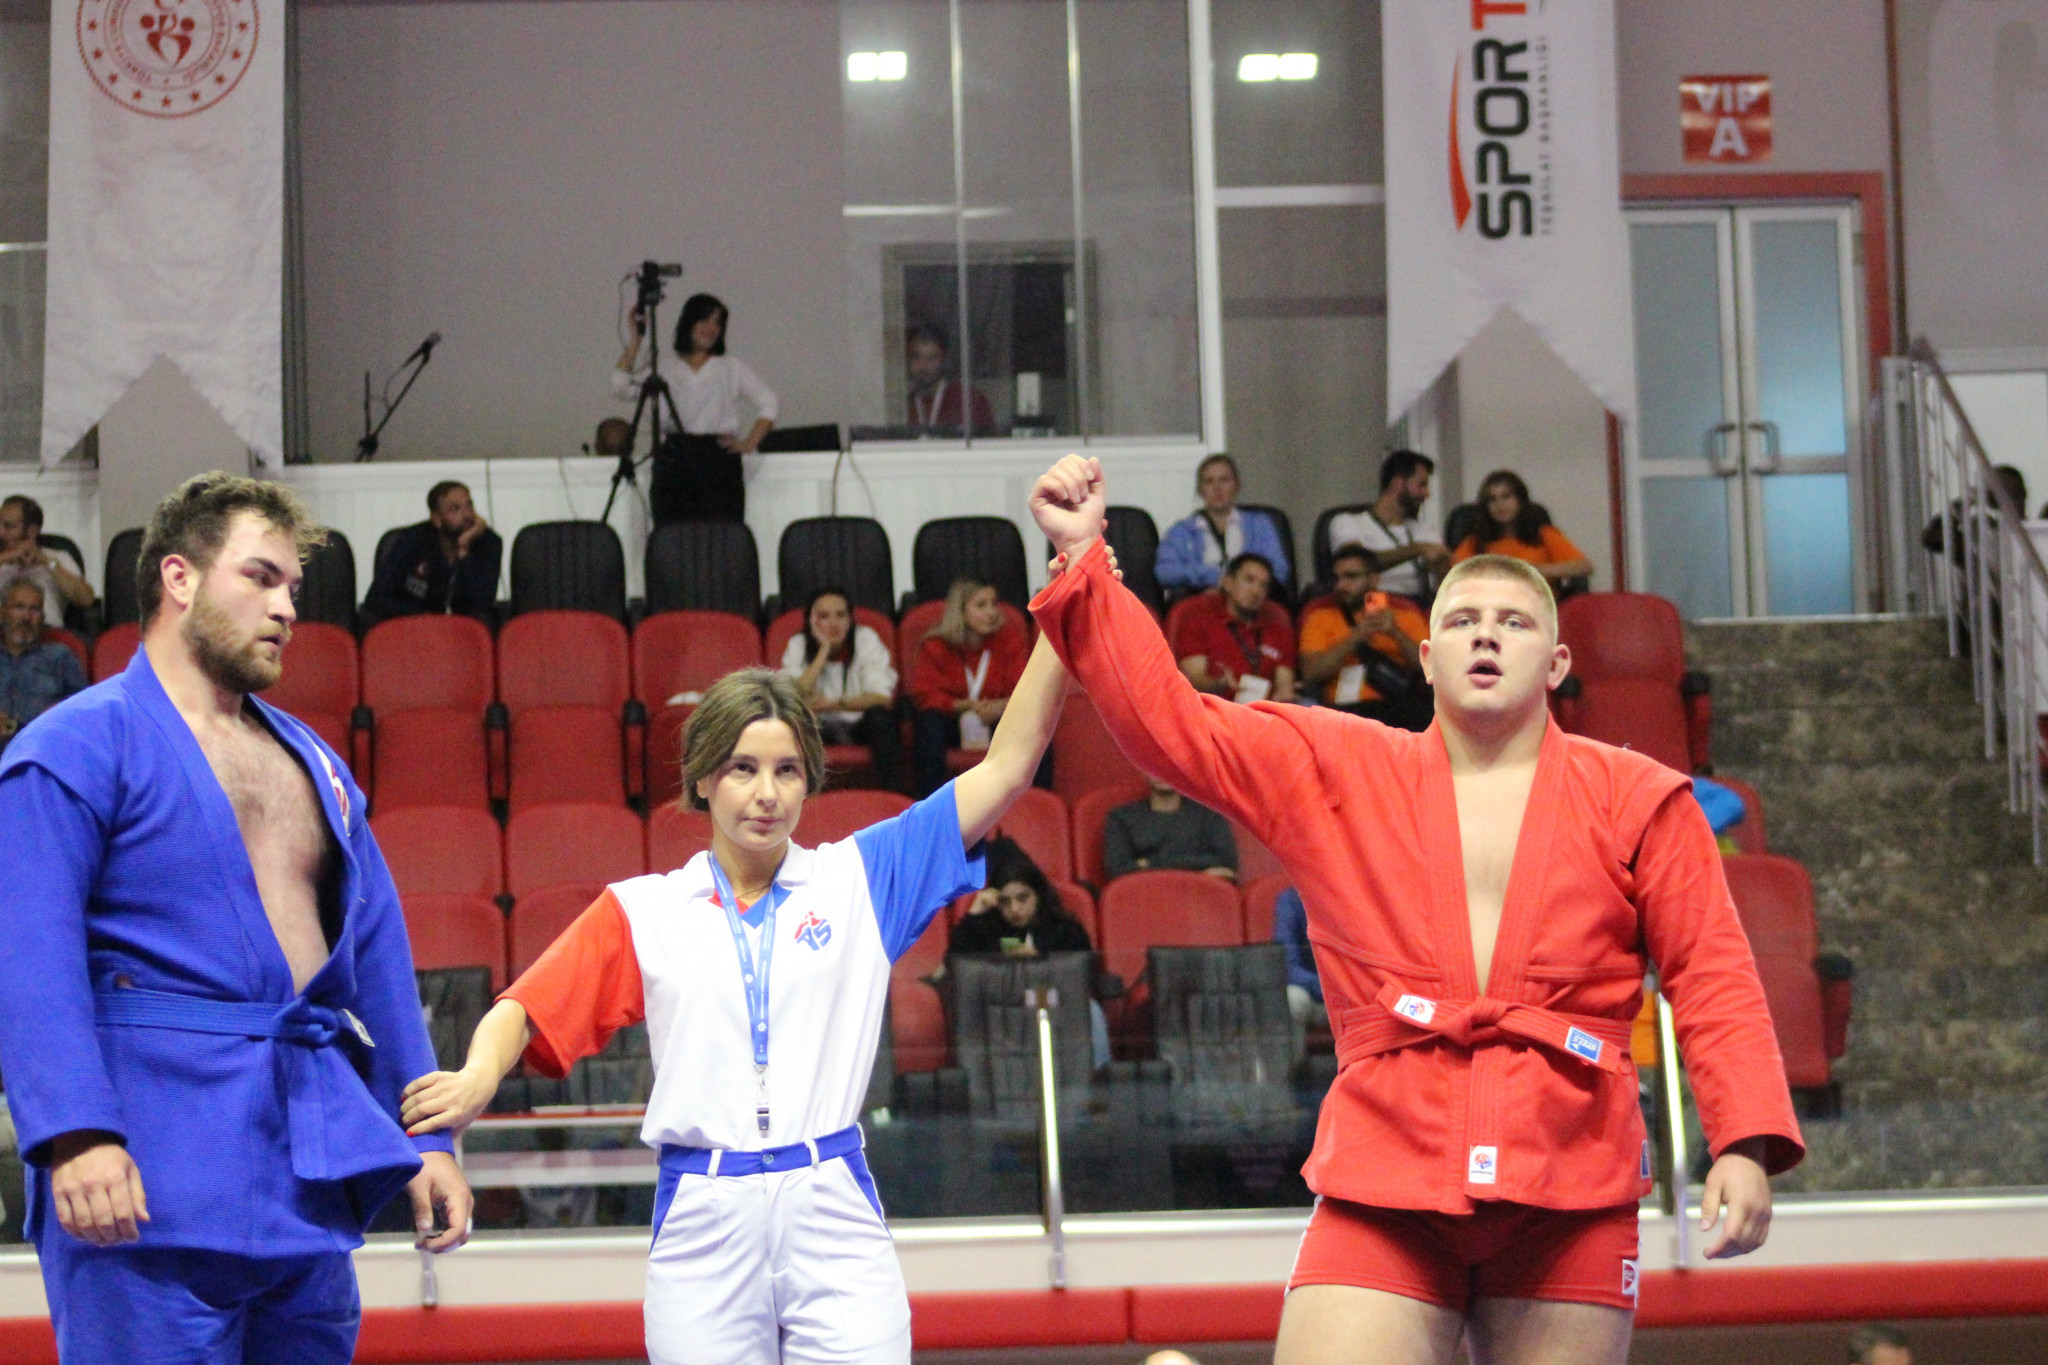 Ukraine and Turkey's teams competed in a friendly sambo competition today ©FISU